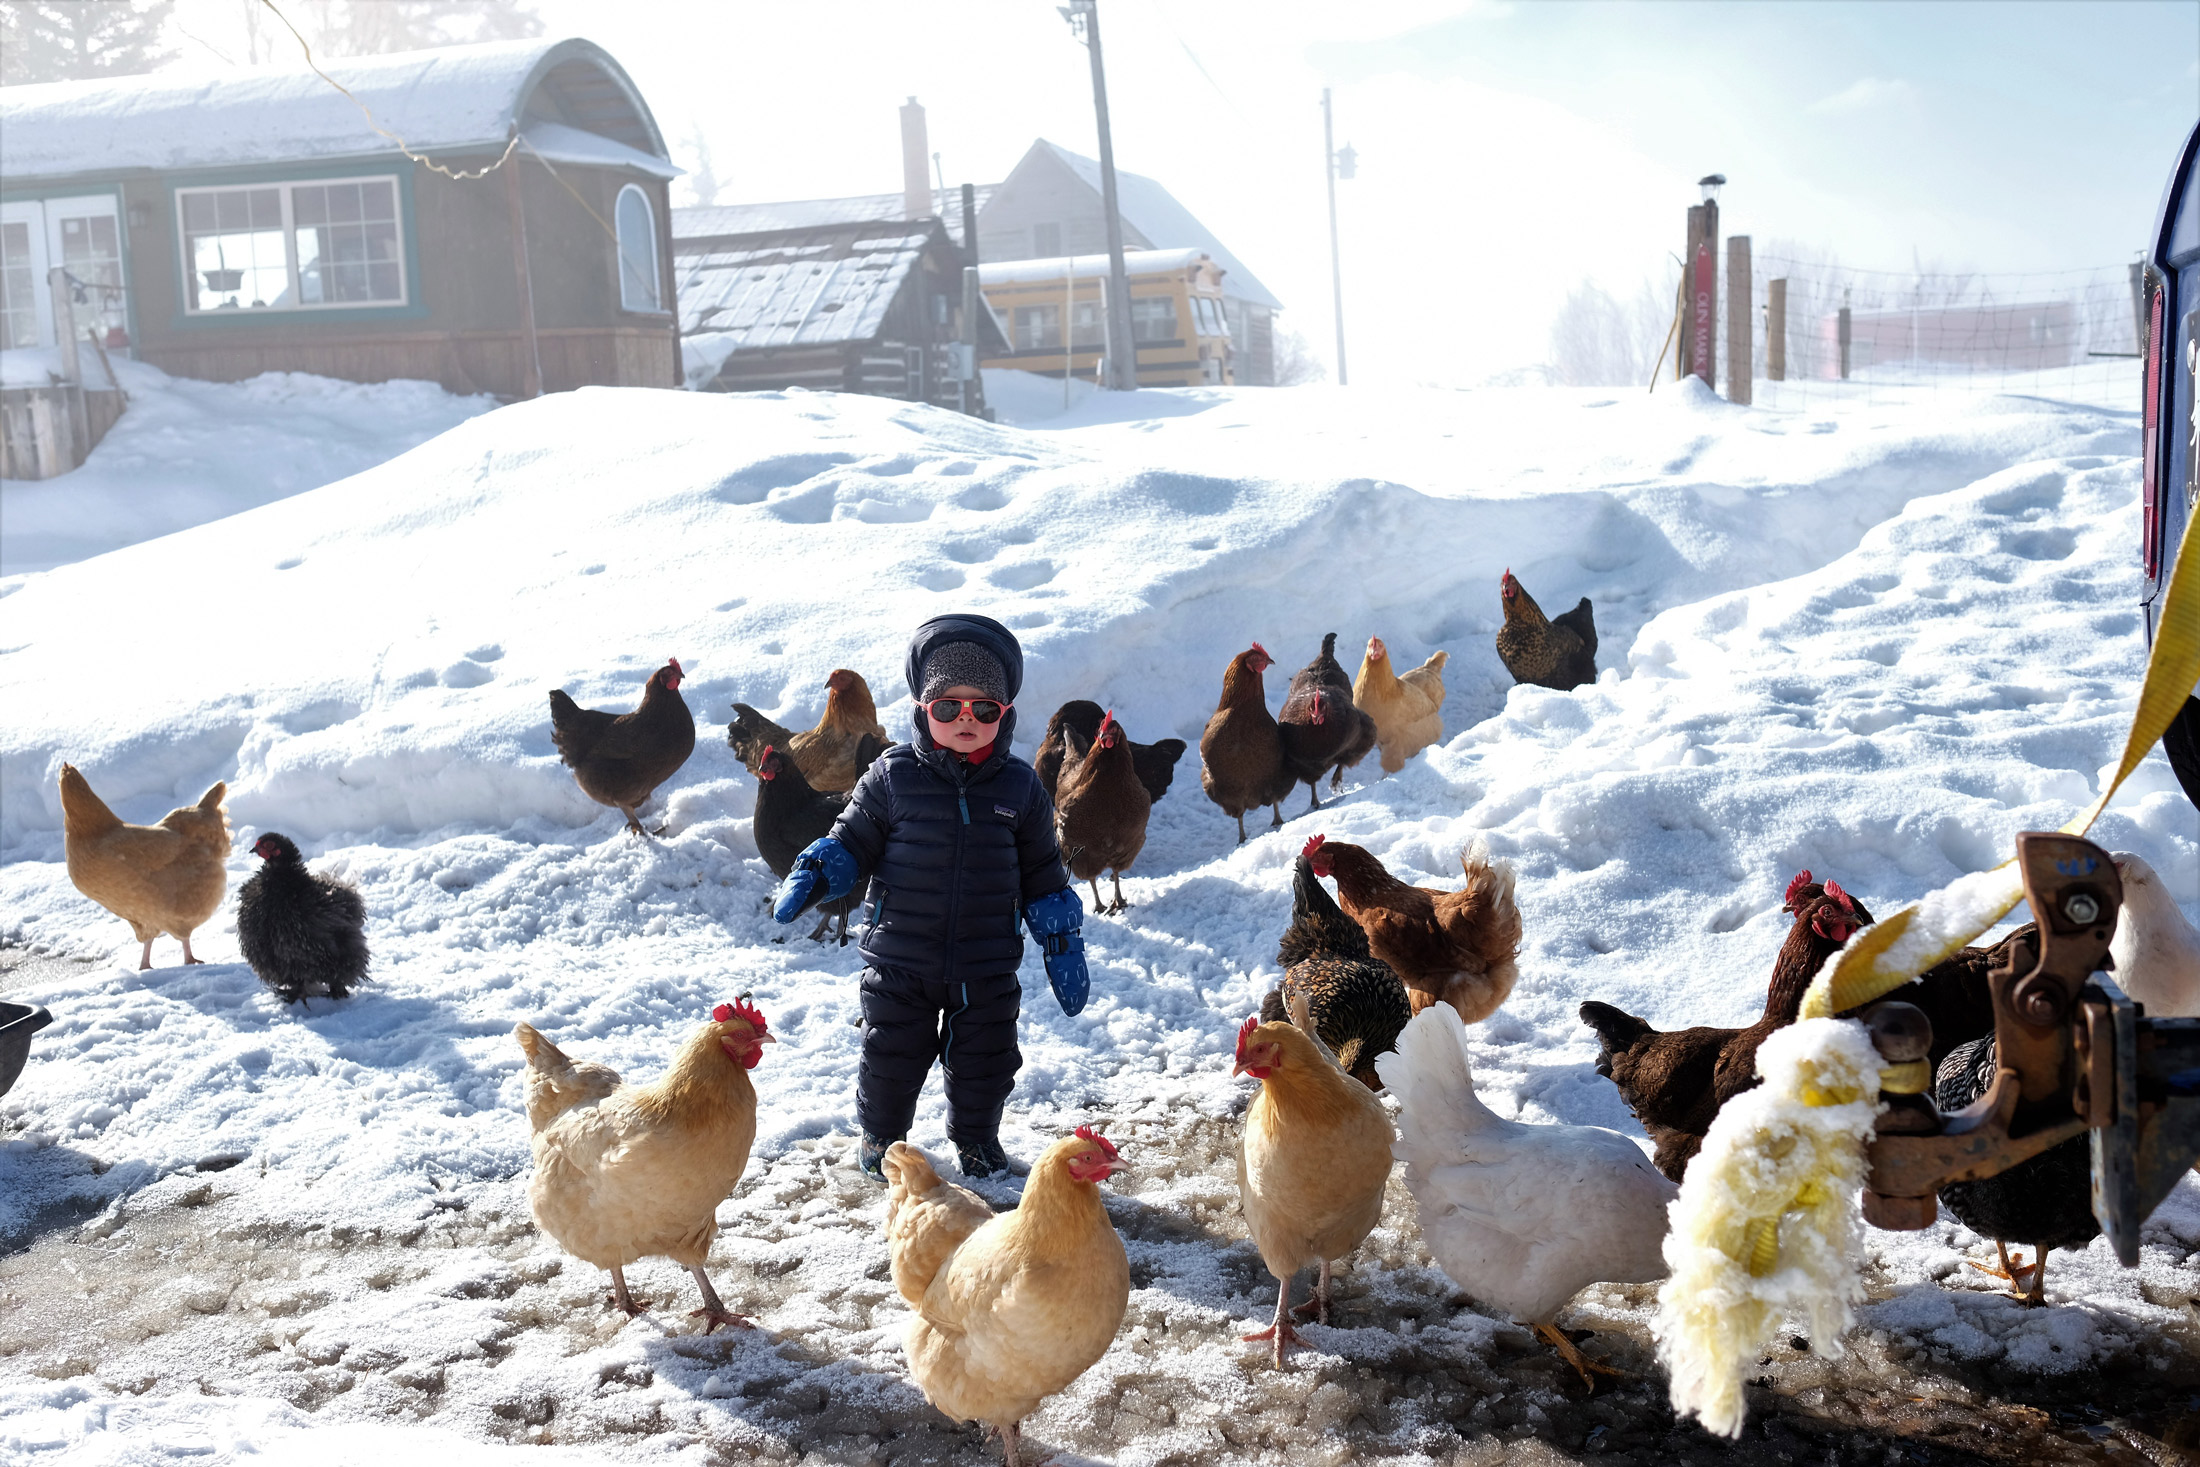 Young boy surrounded by chickens in snowy landscape